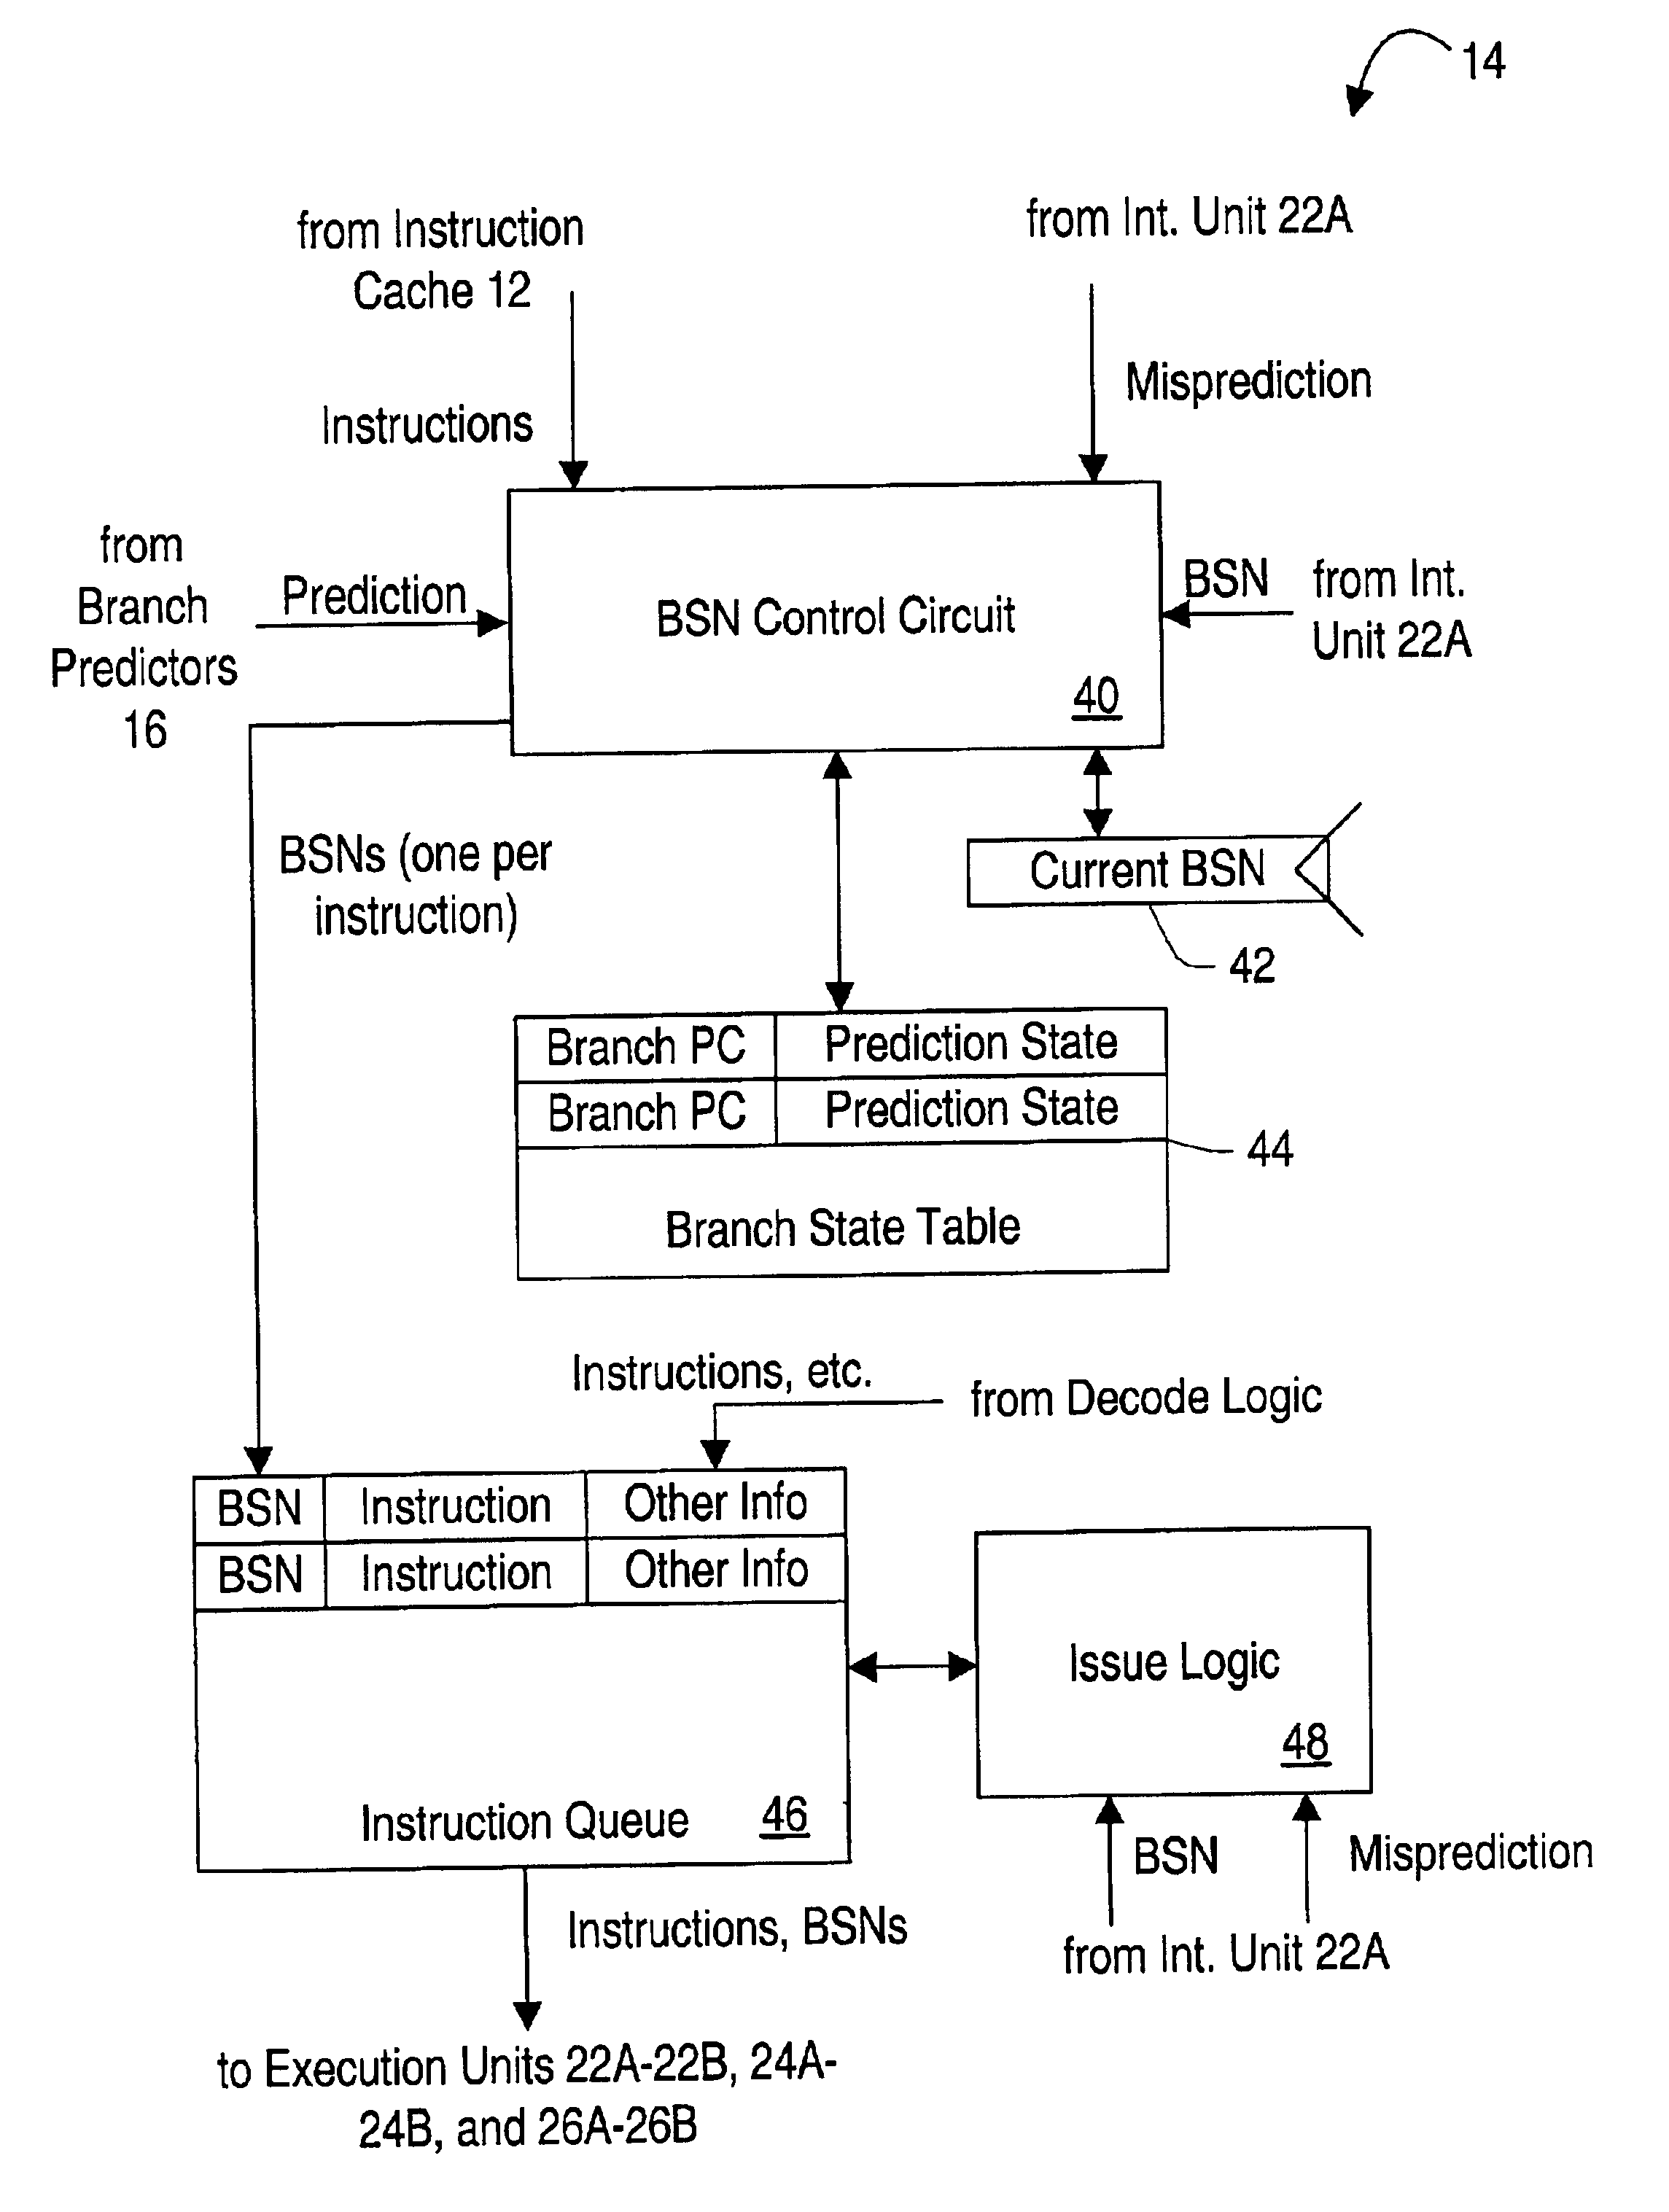 Method for identifying basic blocks with conditional delay slot instructions